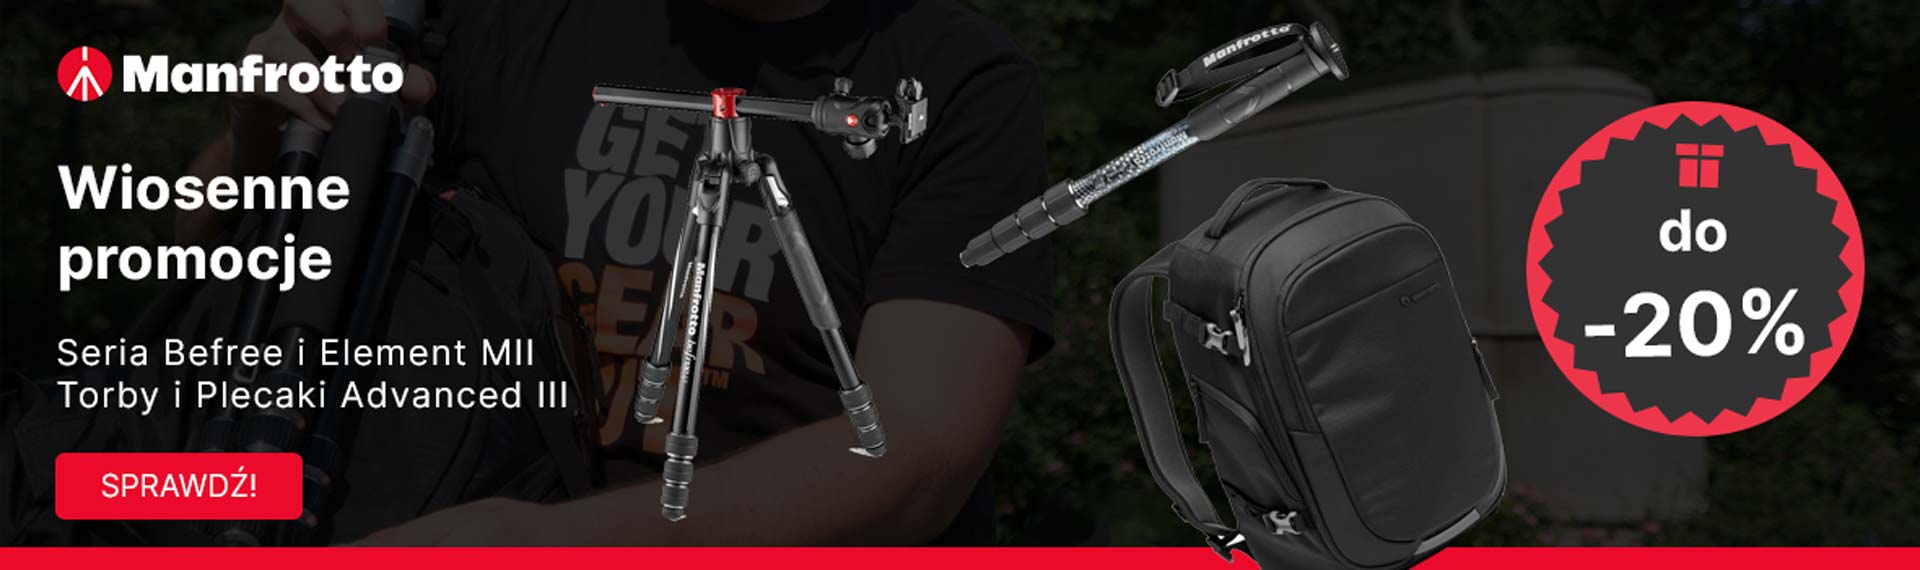 Promocja Manfrotto